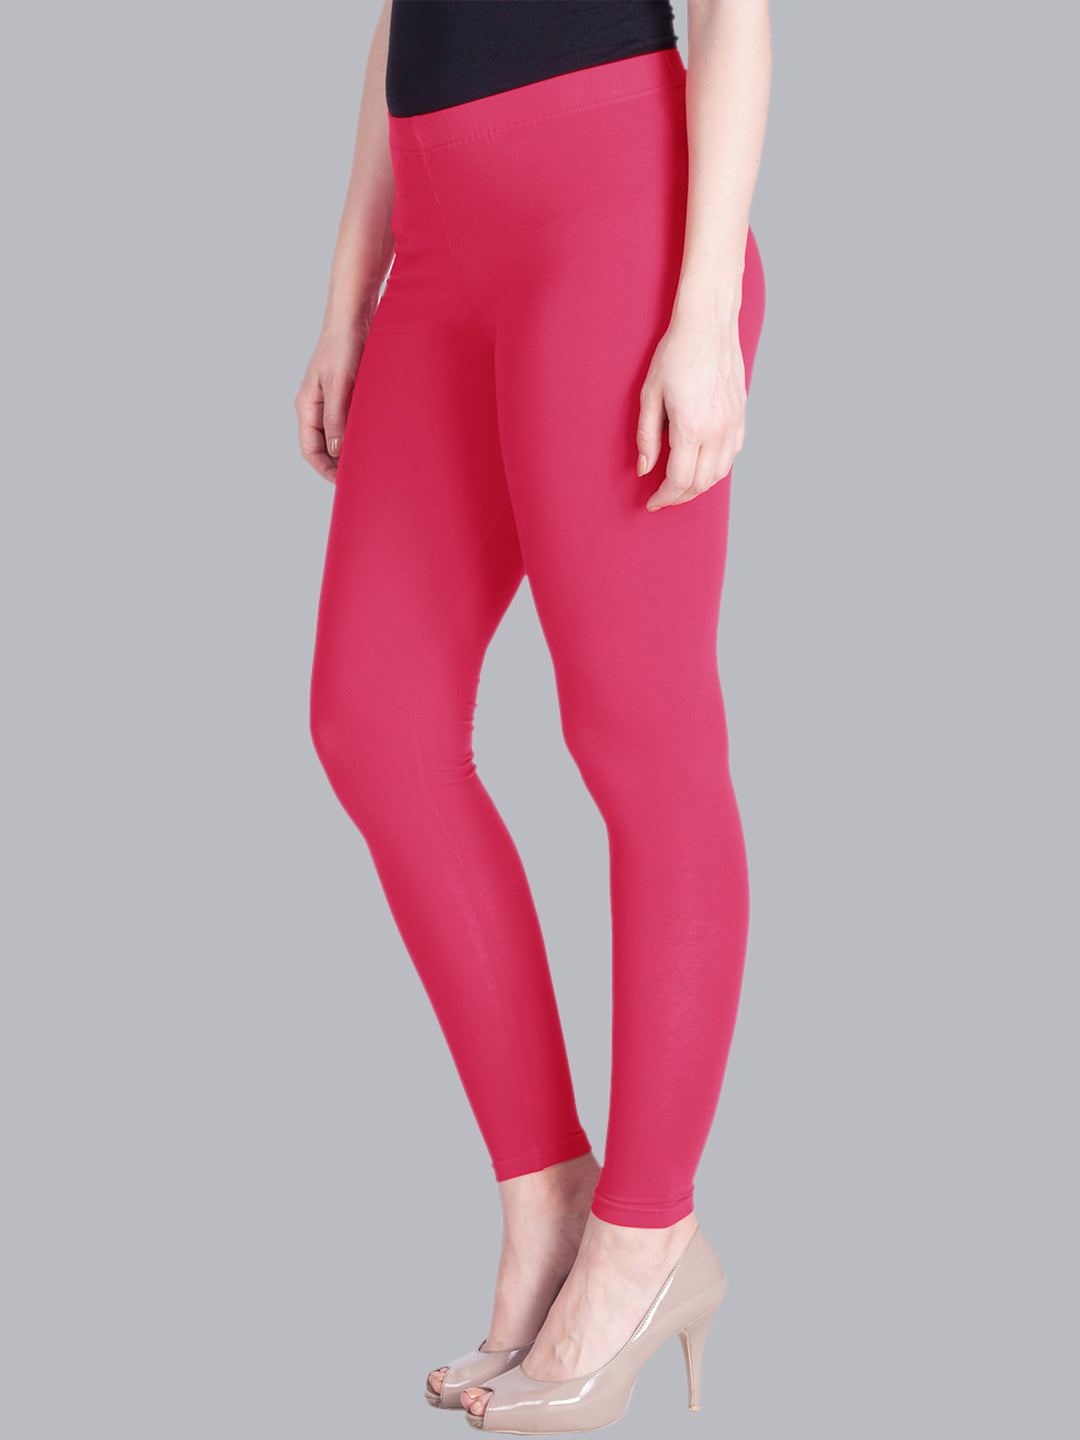 Prisma Full Length Peach Coral - M, Coral at Rs 190, Ankle Length Leggings